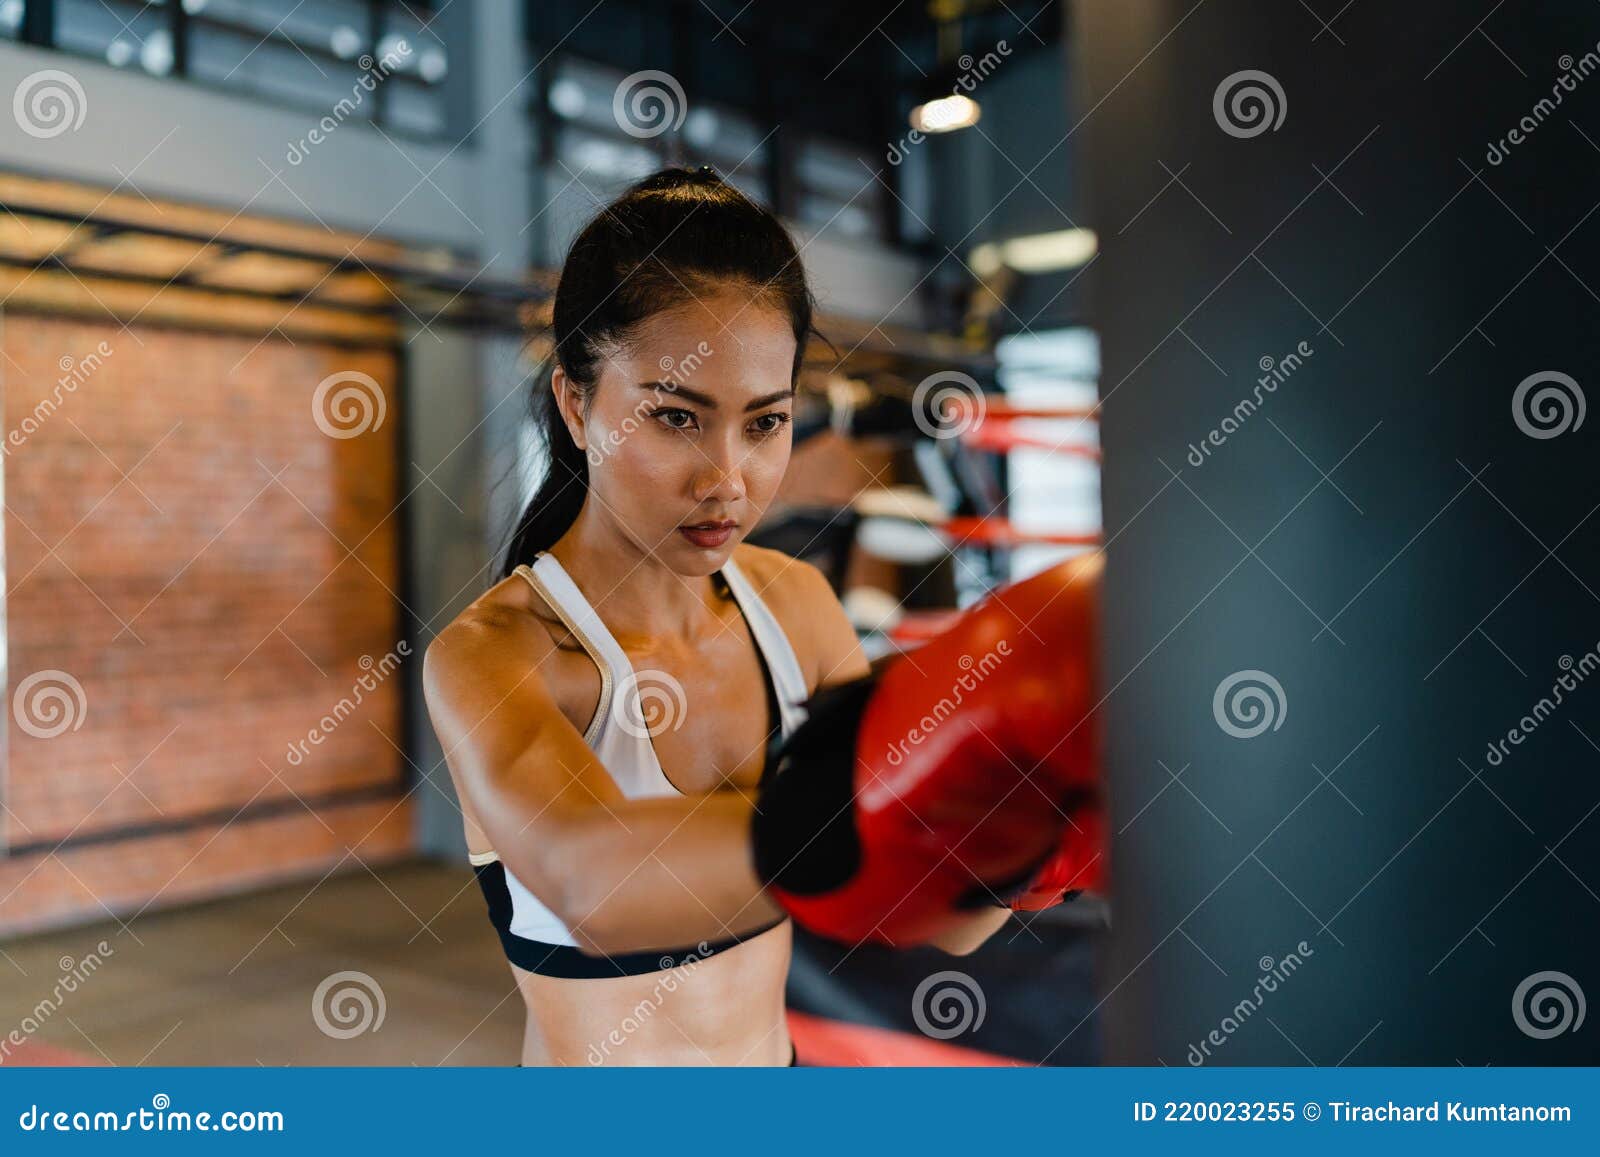 Young Asia lady kickboxing exercise workout punching bag tough female  fighter practice boxing in gym fitness class. Sportswoman recreational  activity, functional training, healthy lifestyle concept. Stock Photo